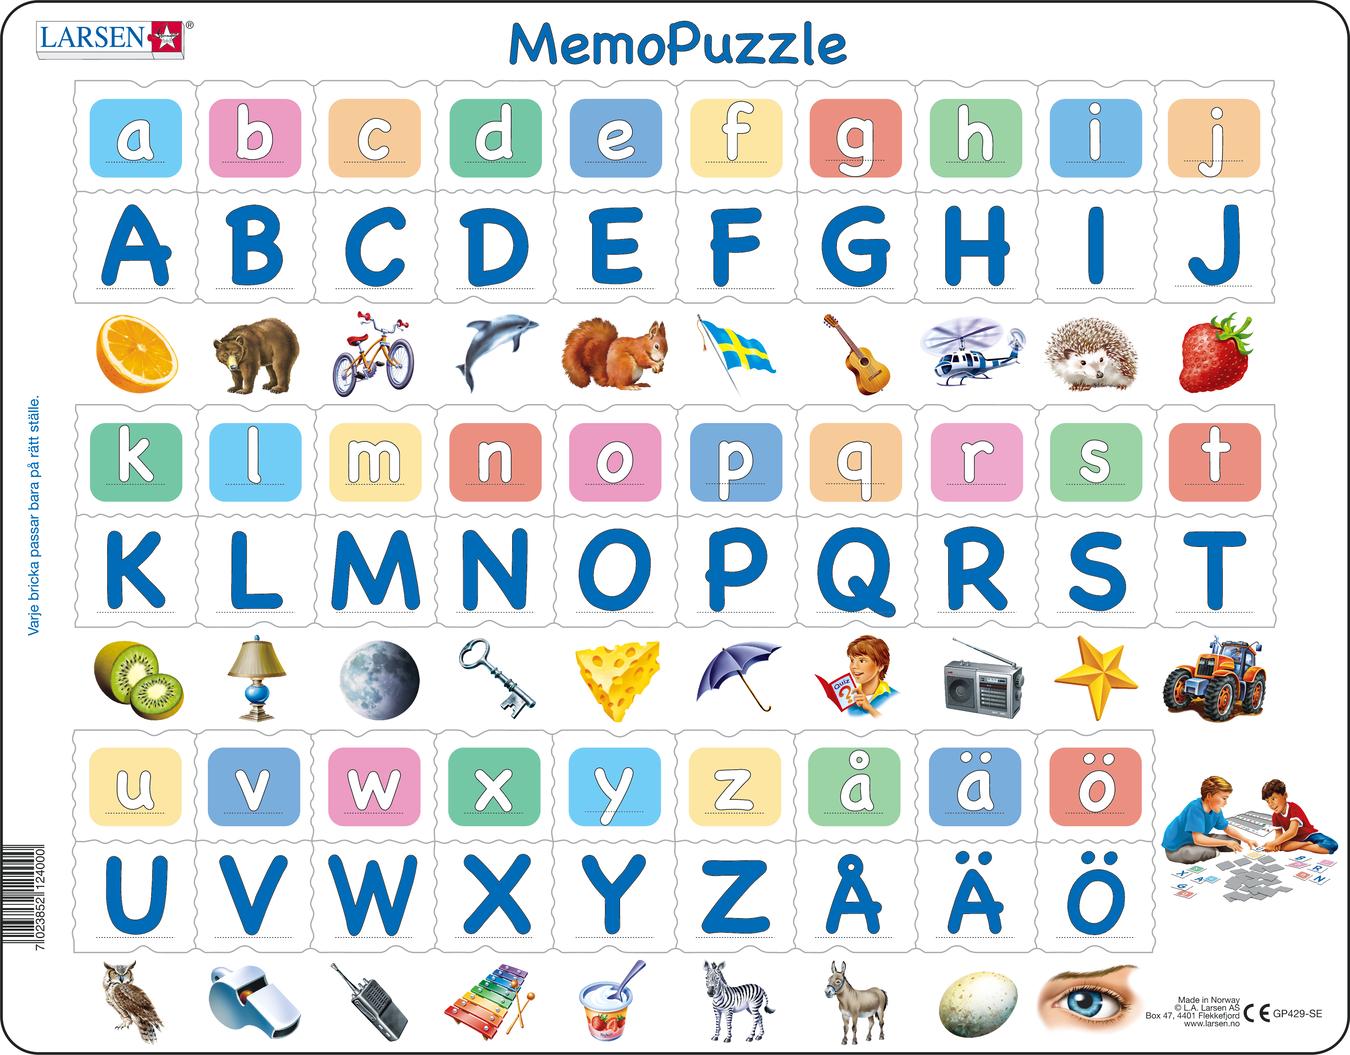 GP429 - MemoPuzzle: The Alphabet with 29 Upper and Lower Case Letters ...